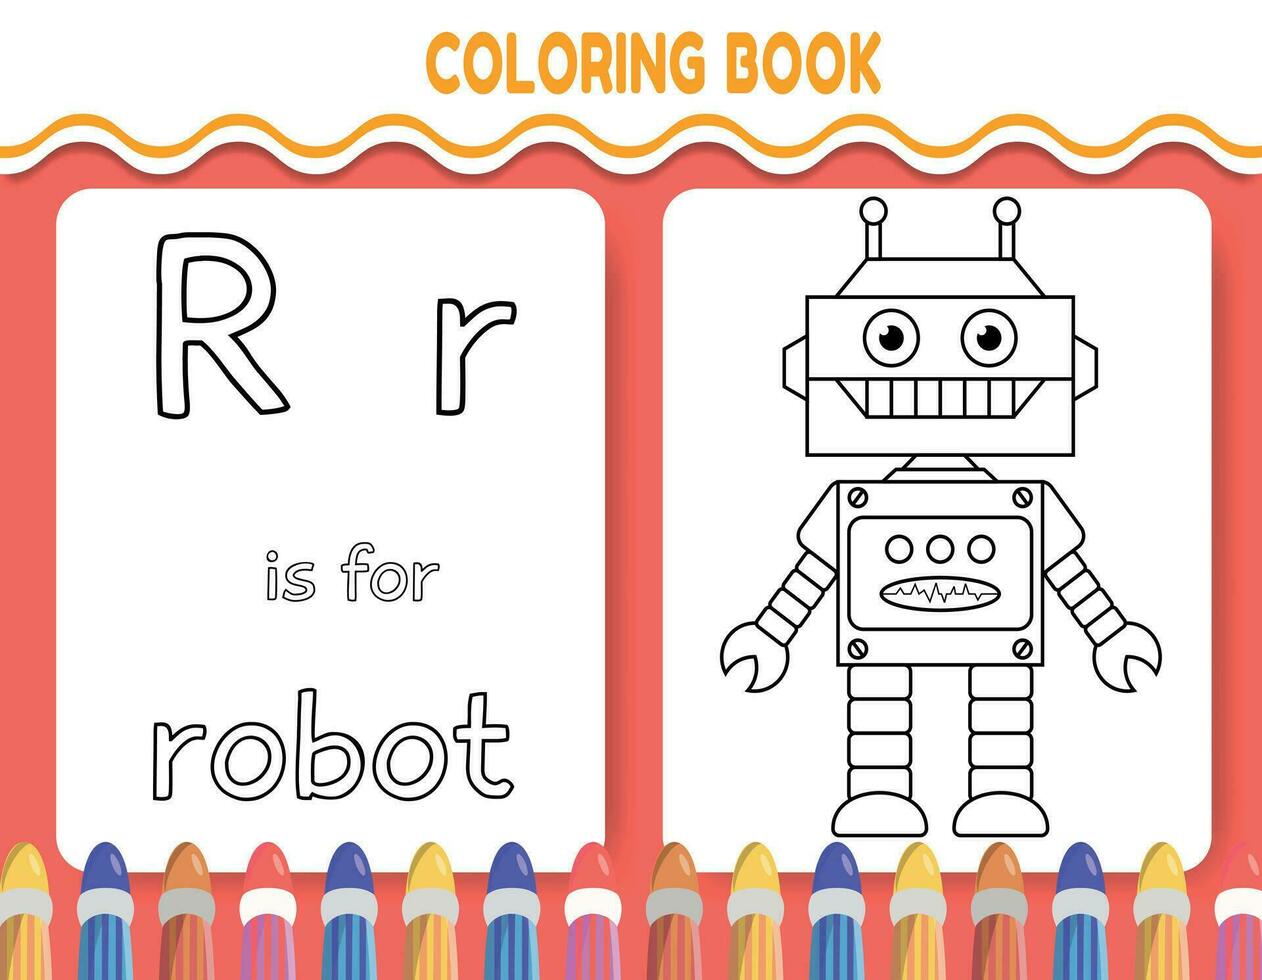 Kids alphabet coloring book page with outlined clipart to color. The letter R is for robot. vector